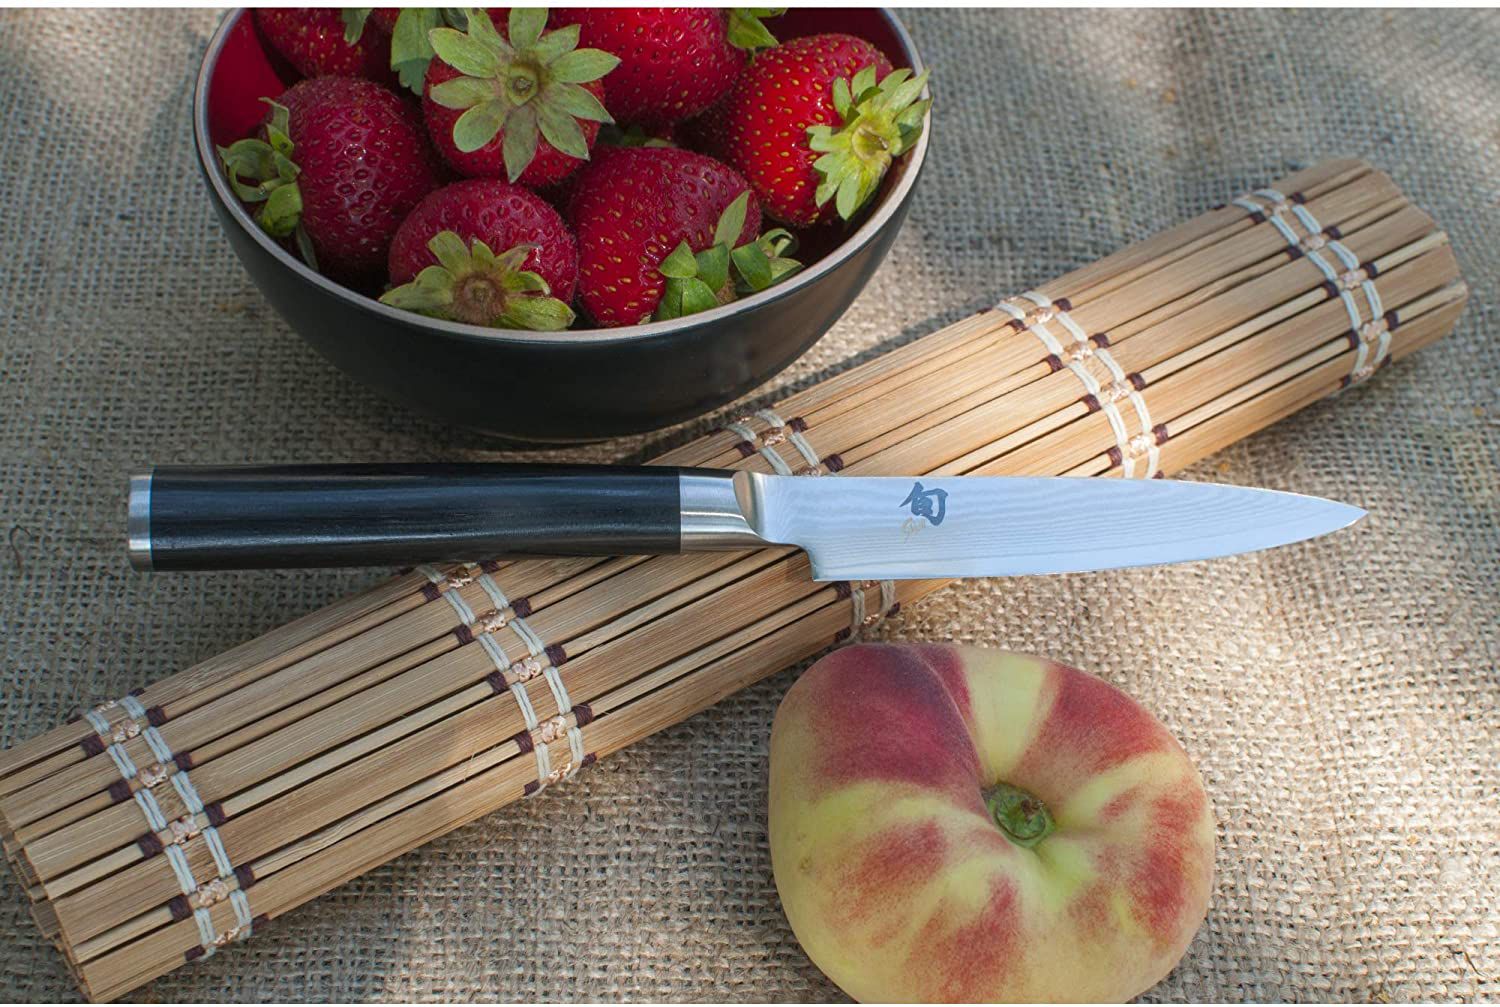 The Best Kitchen Knives? Let’s Cut to the Chase.